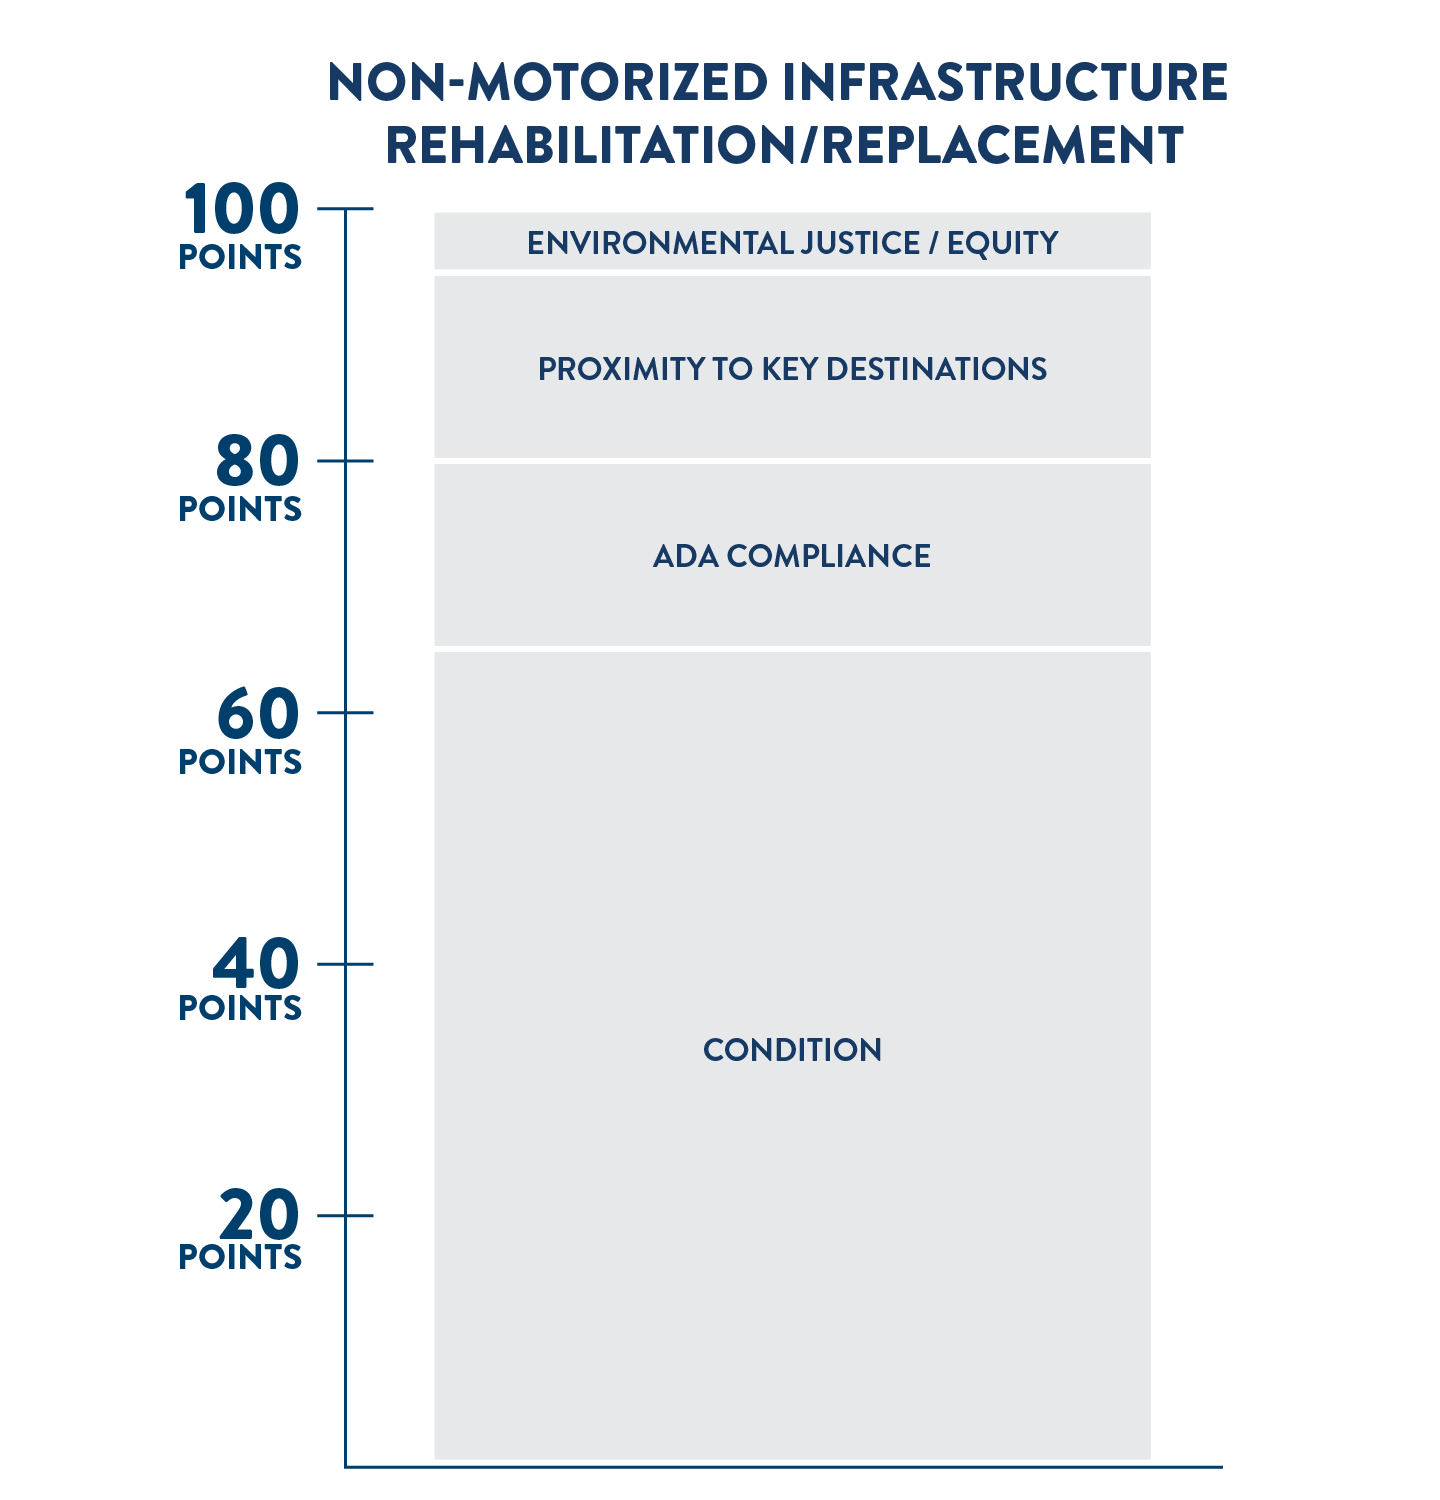 Scoring criteria for standalone projects to rehabilitate or replace nonmotorized infrastructure such as sidewalks and shared use paths. Out of 100 possible points, 65 points are based on the condition of the infrastructure, 15 points based on compliance with Americans with Disability Act, 15 points are based on proximity to key destinations, and 5 points based on whether the project will benefit an environmental justice population.